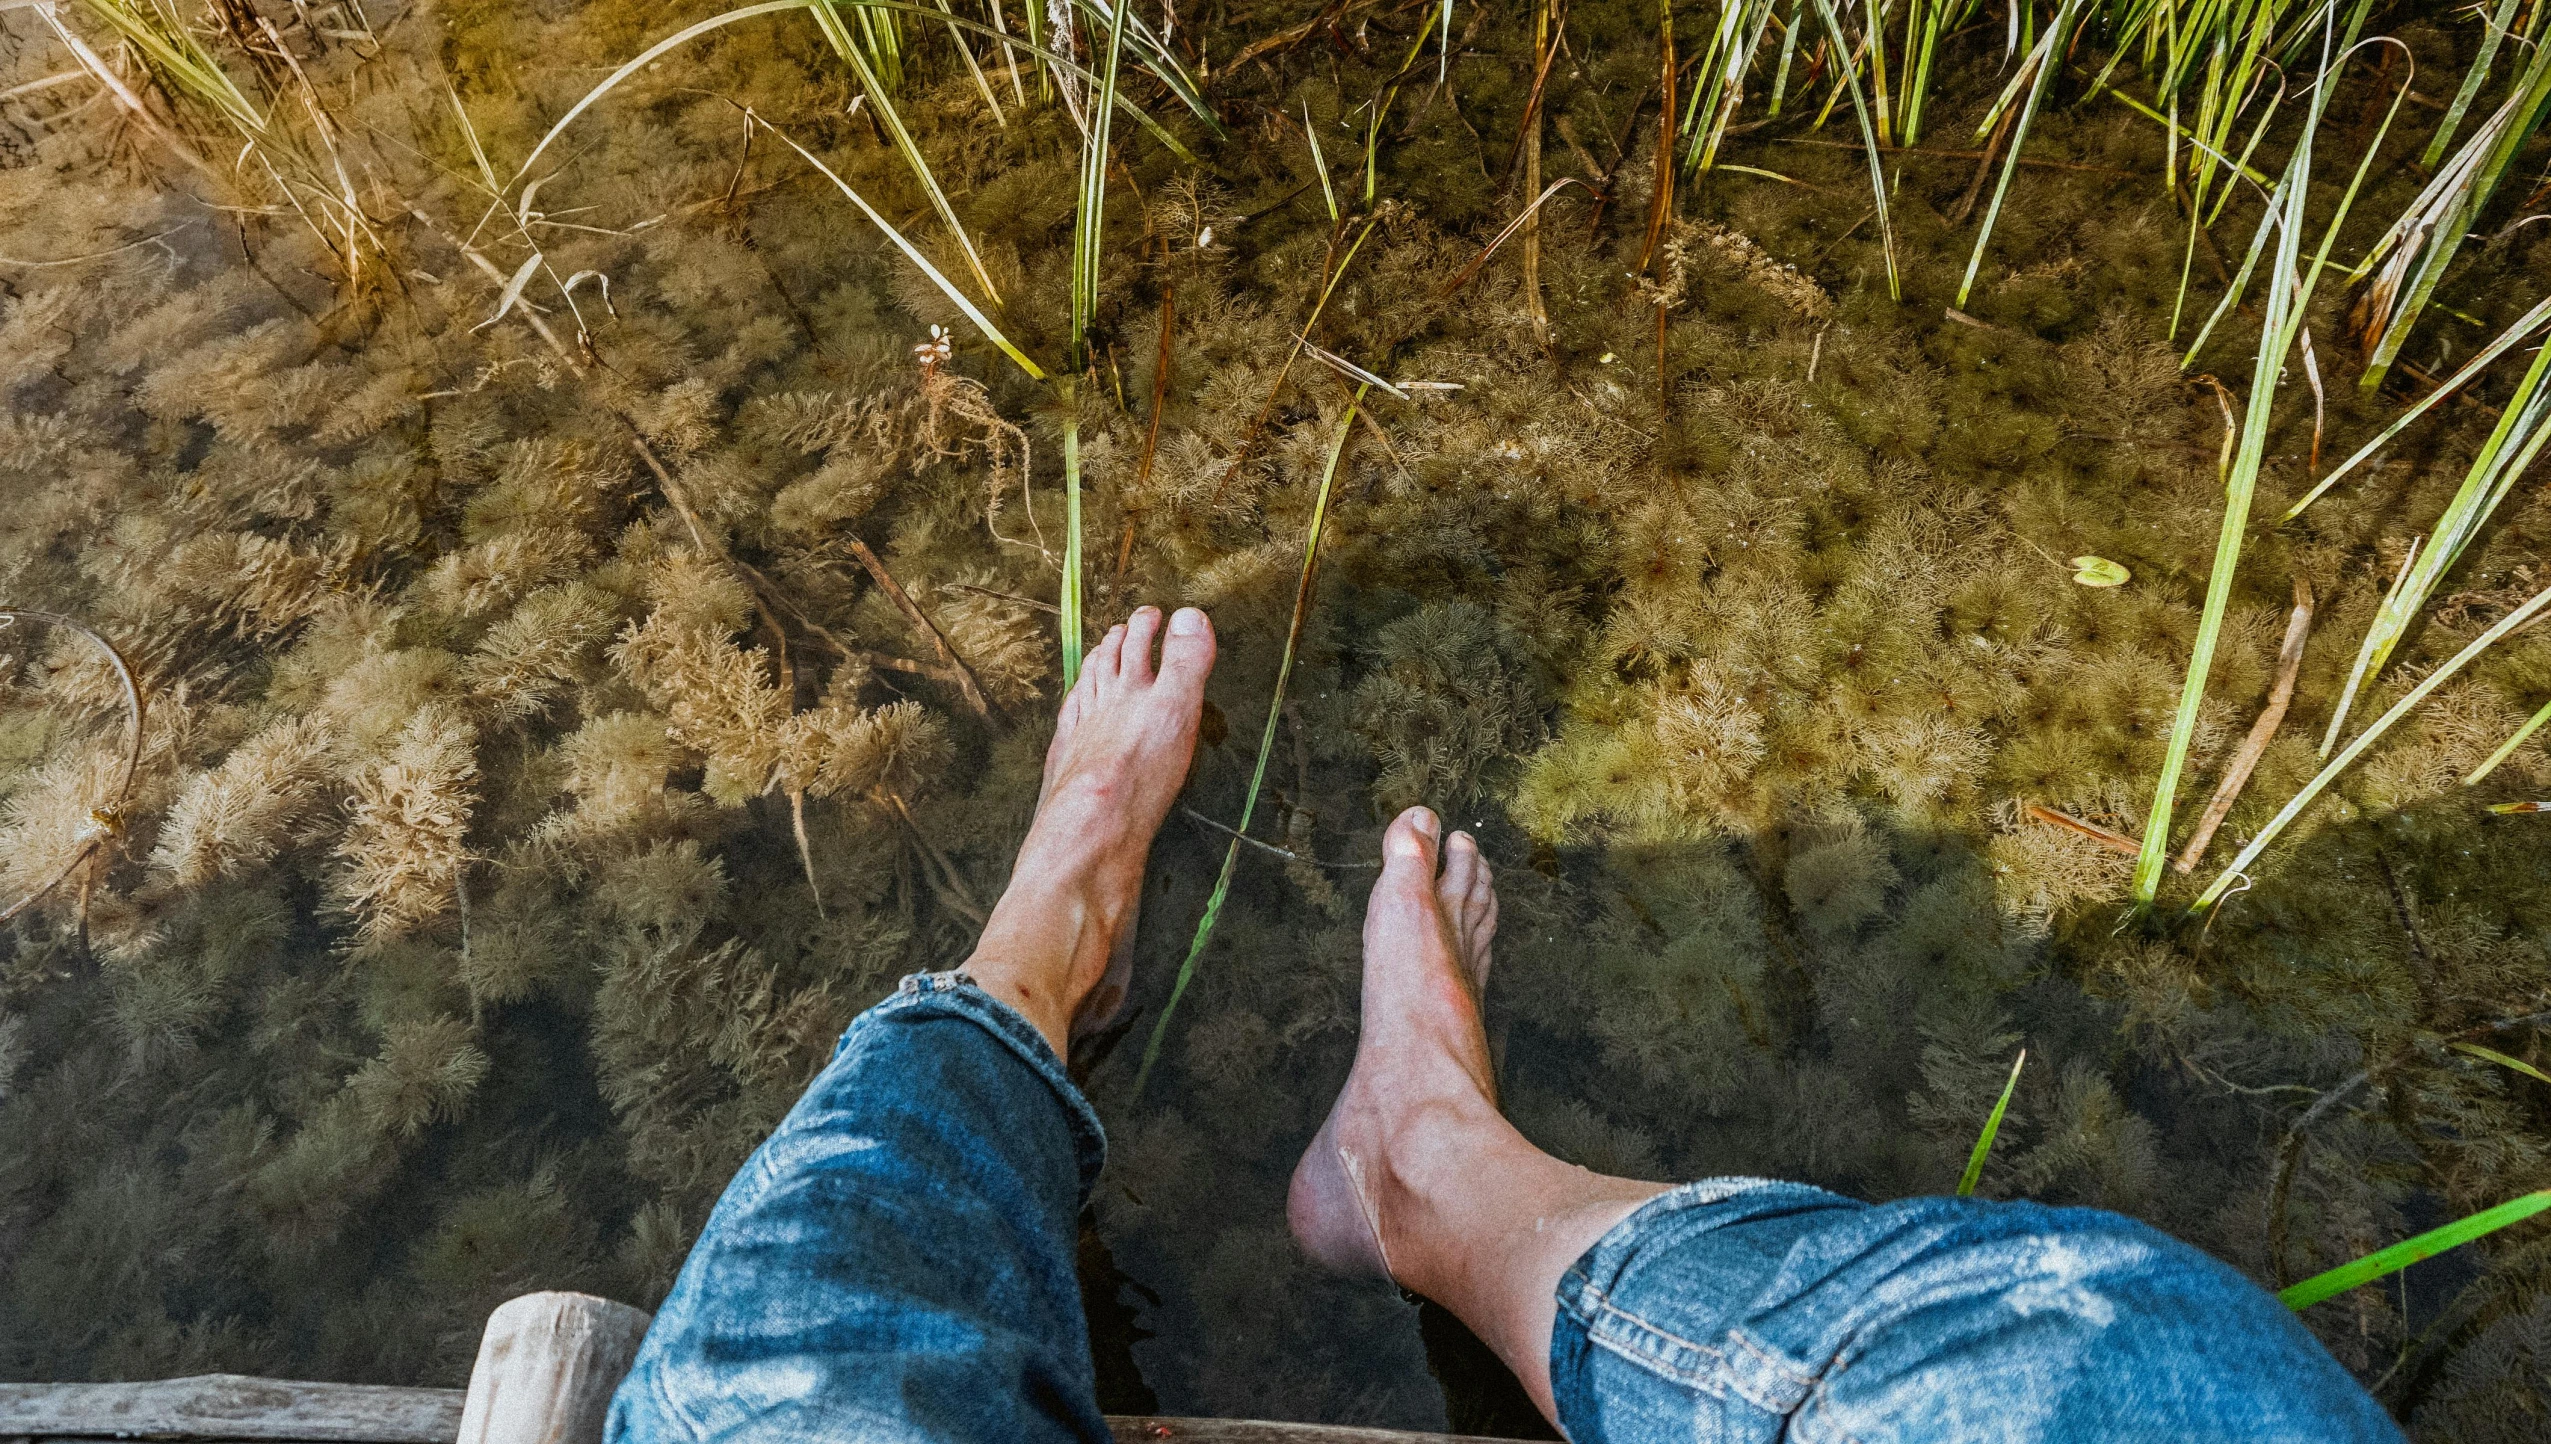 a person standing next to a body of water, algae feet, sitting down casually, permaculture, holiday season